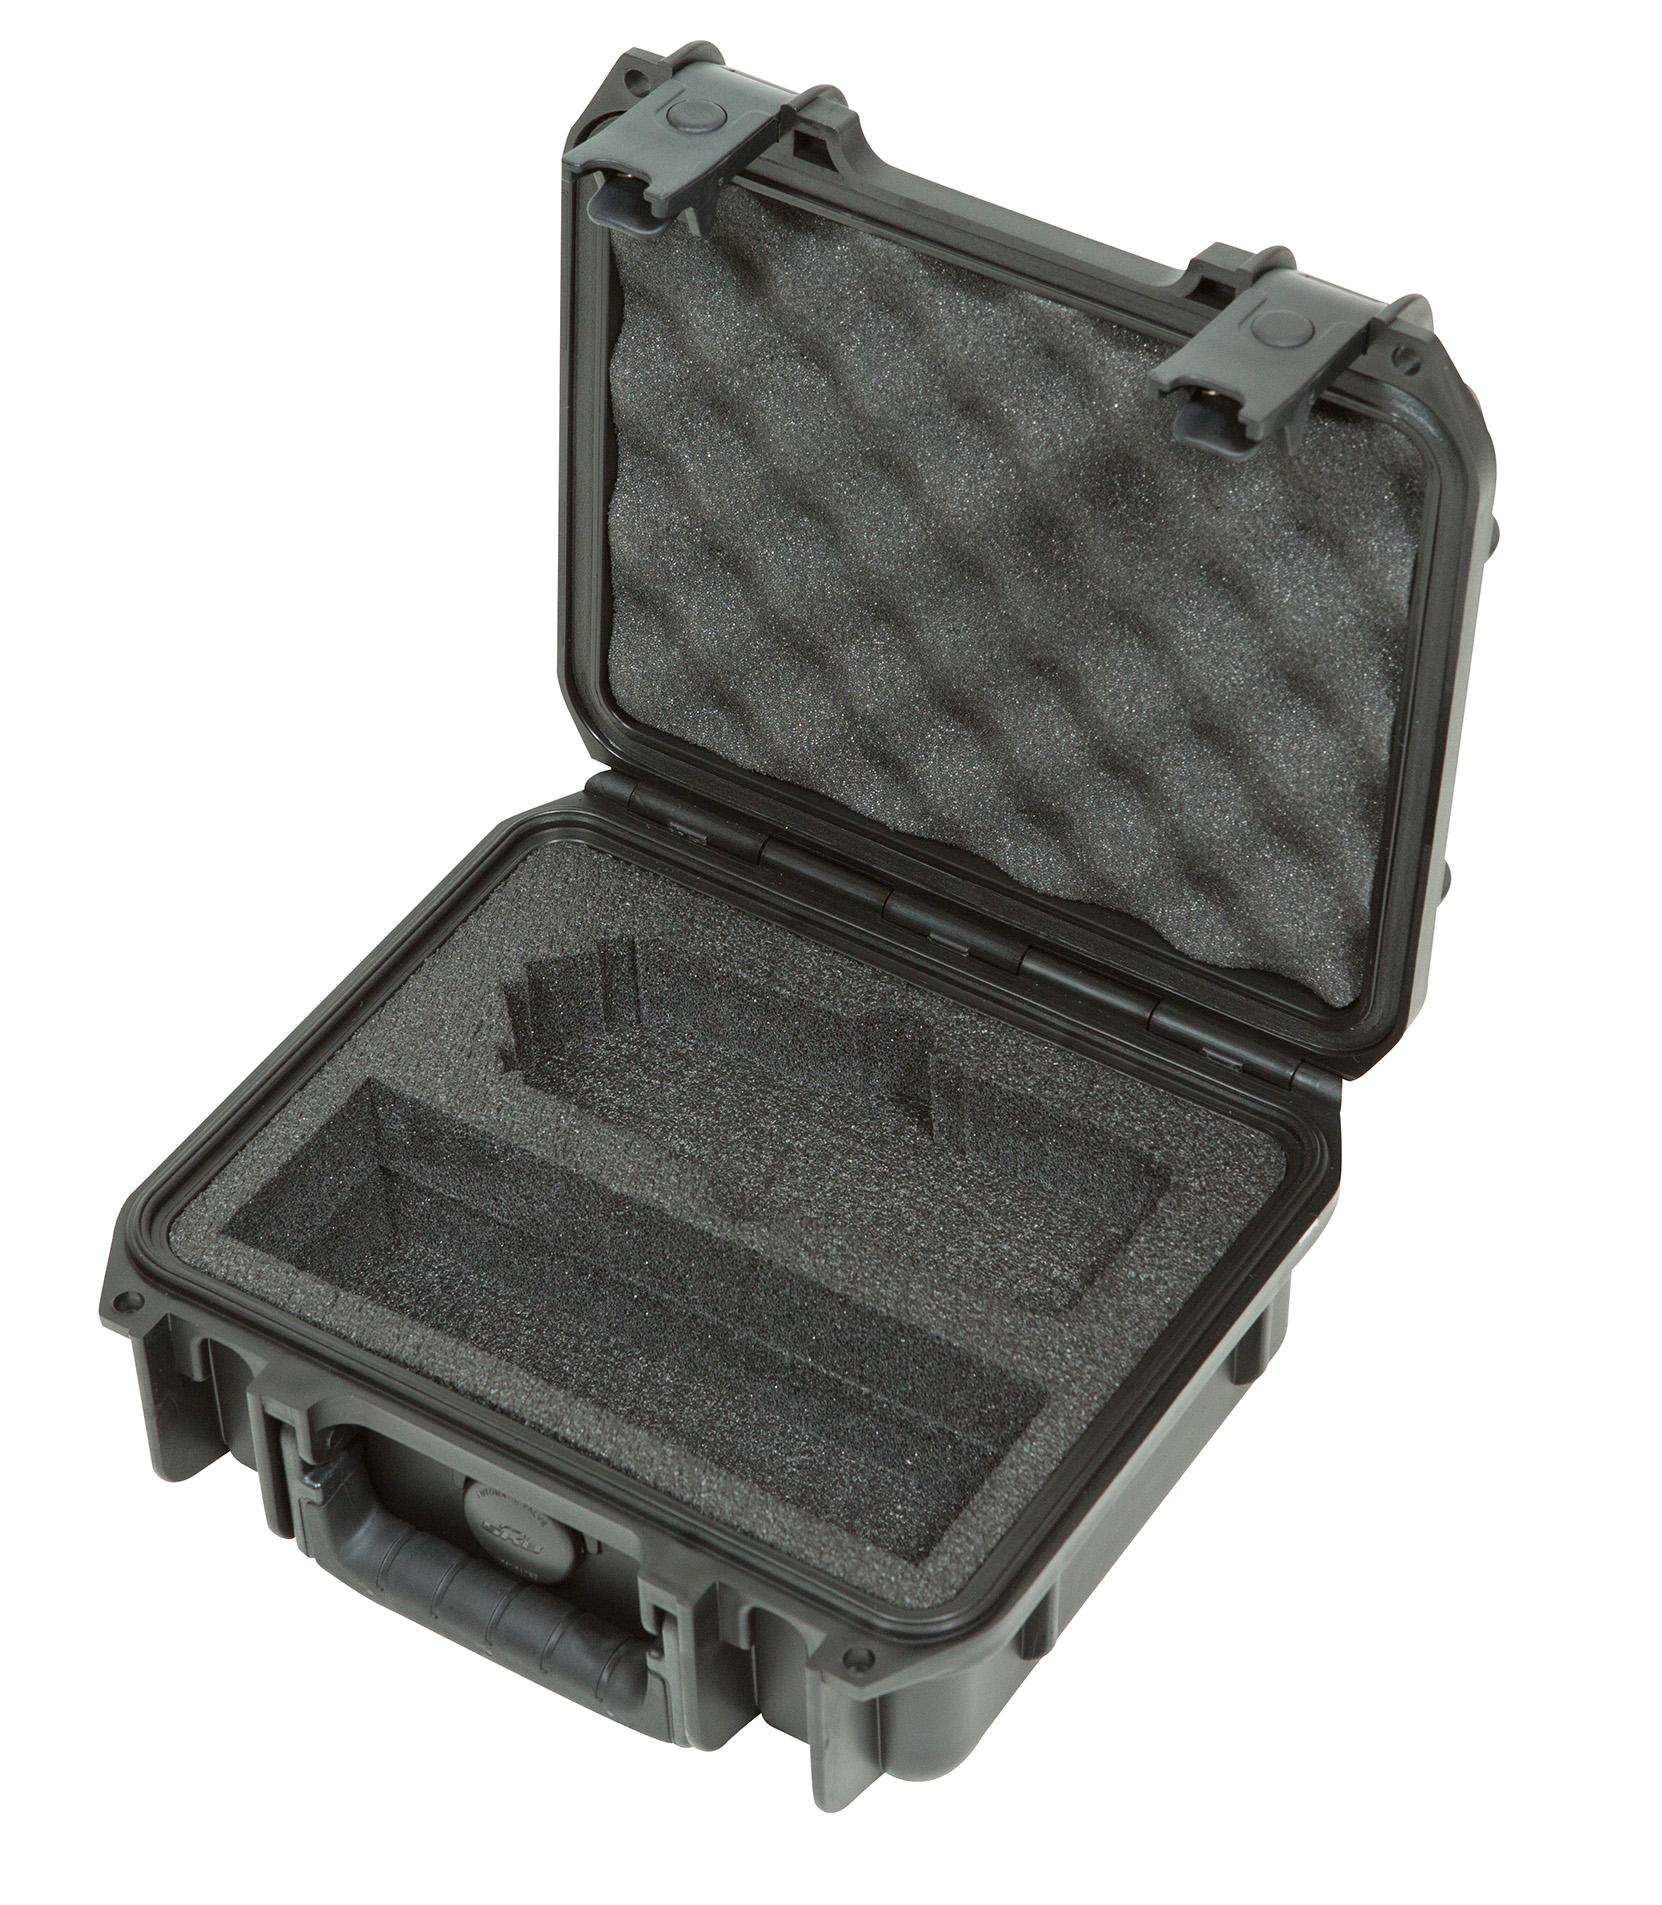 3I 0907 4 H5 Injection Molded Case for Zoom H5 Re - 3I-0907-4-H5 - Melody House Dubai, UAE